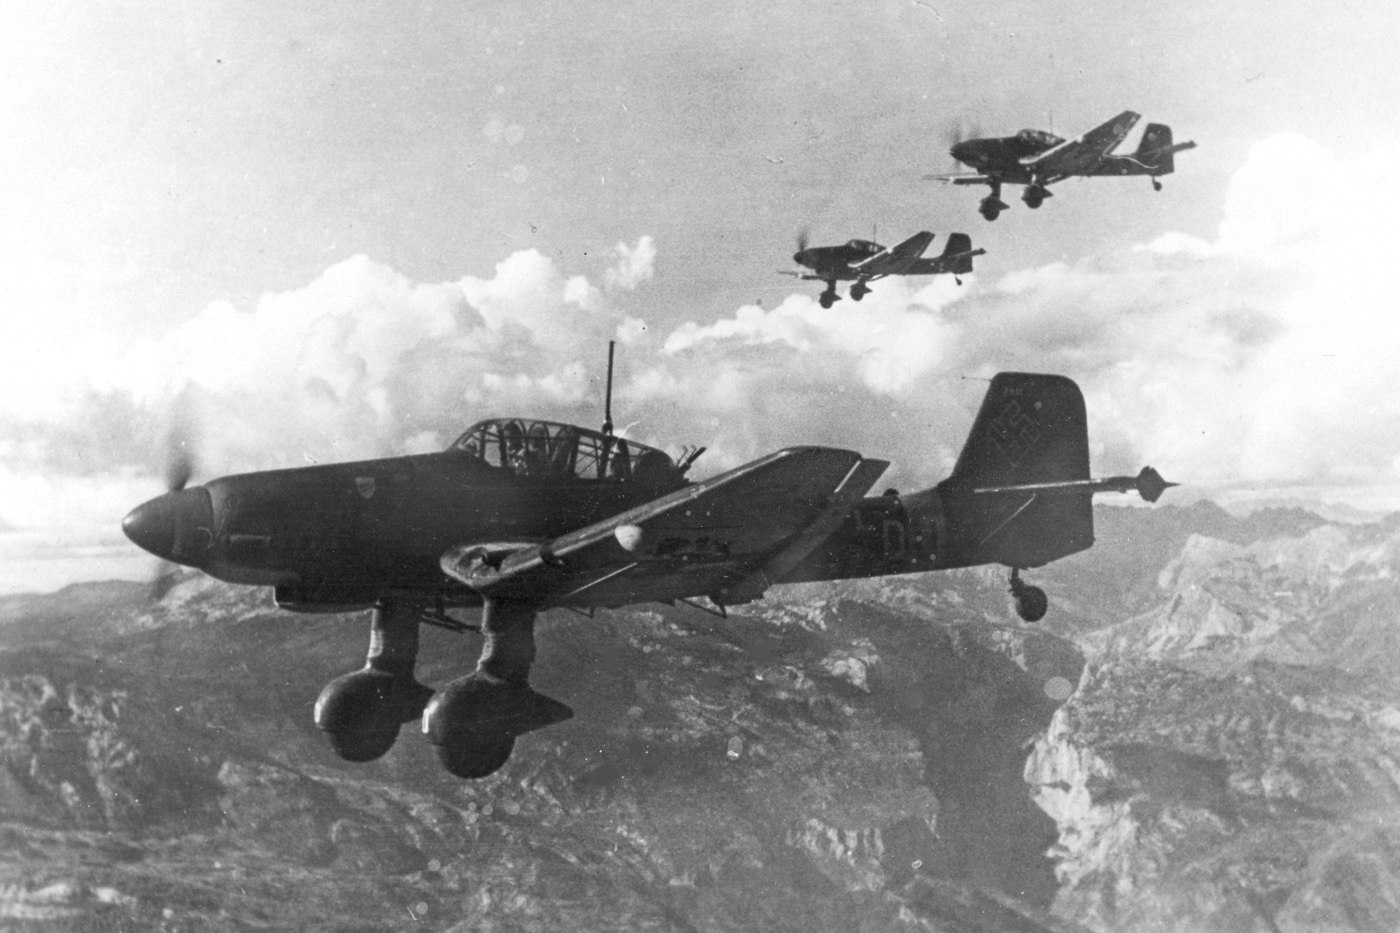 In this vintage photograph, we see a three plane formation of a German air force Ju 87D dive bombers enroute to attack Yugoslavian partisans fighting the Nazis. From the cockpit, a pilot could make the Junkers dive and attack infantry positions. In fact, Stukas dropped the first bombs of the war in the European War. Stukas went deep behind enemy lines to strike soft targets and could dive on many otherwise inaccessible targets due to the unique Stuka design. However, the planes were easy targets for enemy fighters and Stuka losses increased throughout the war.